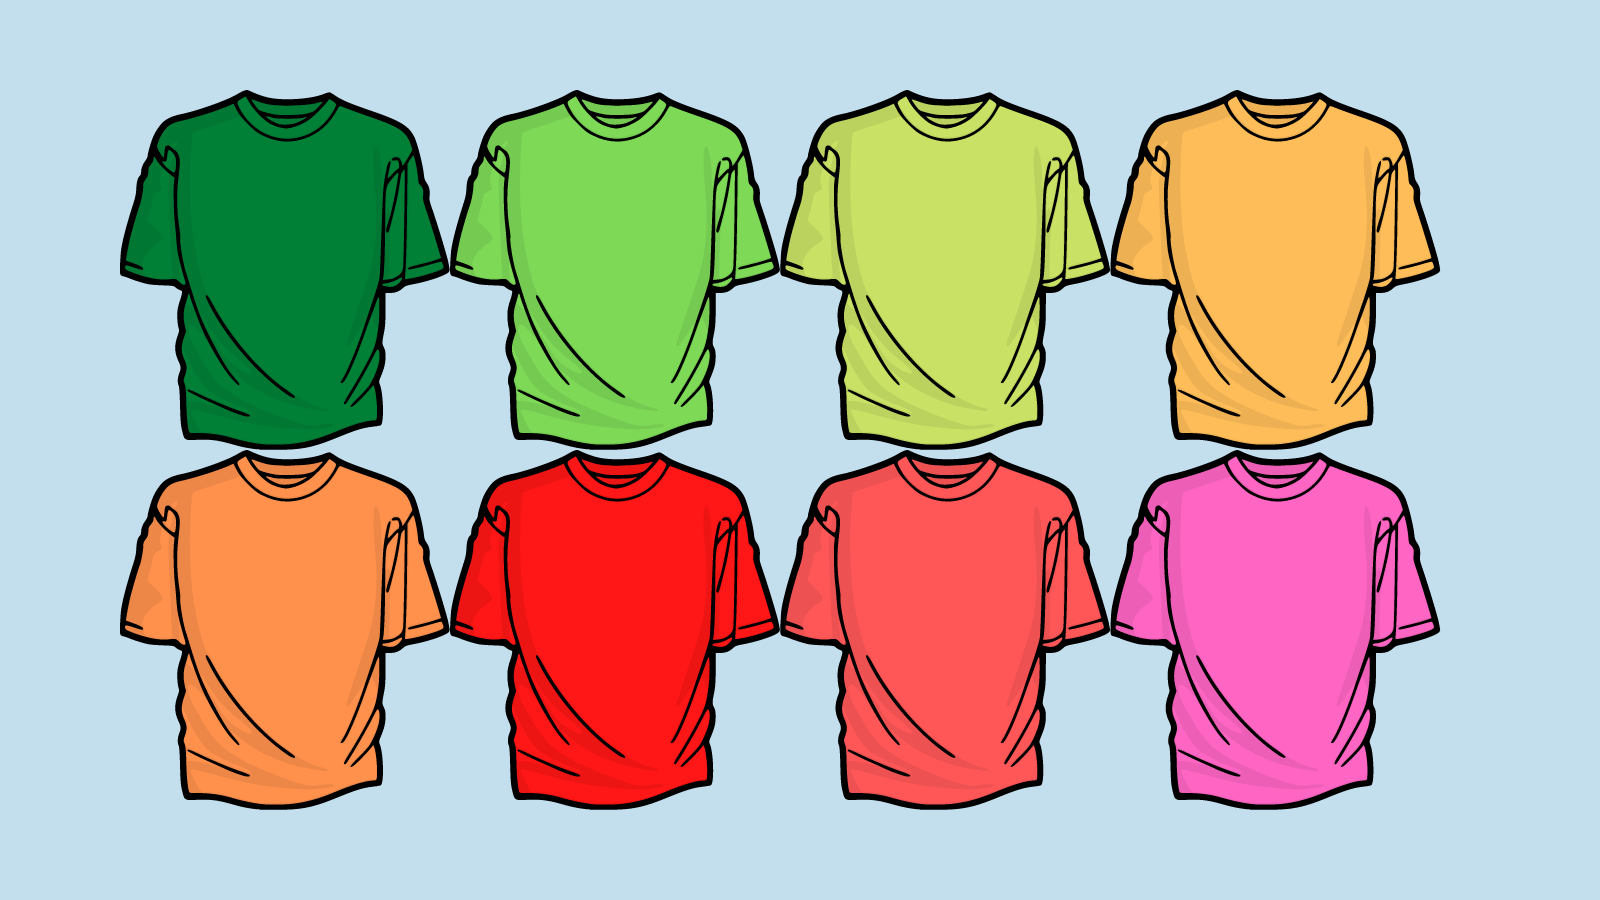 T-shirts in different colors